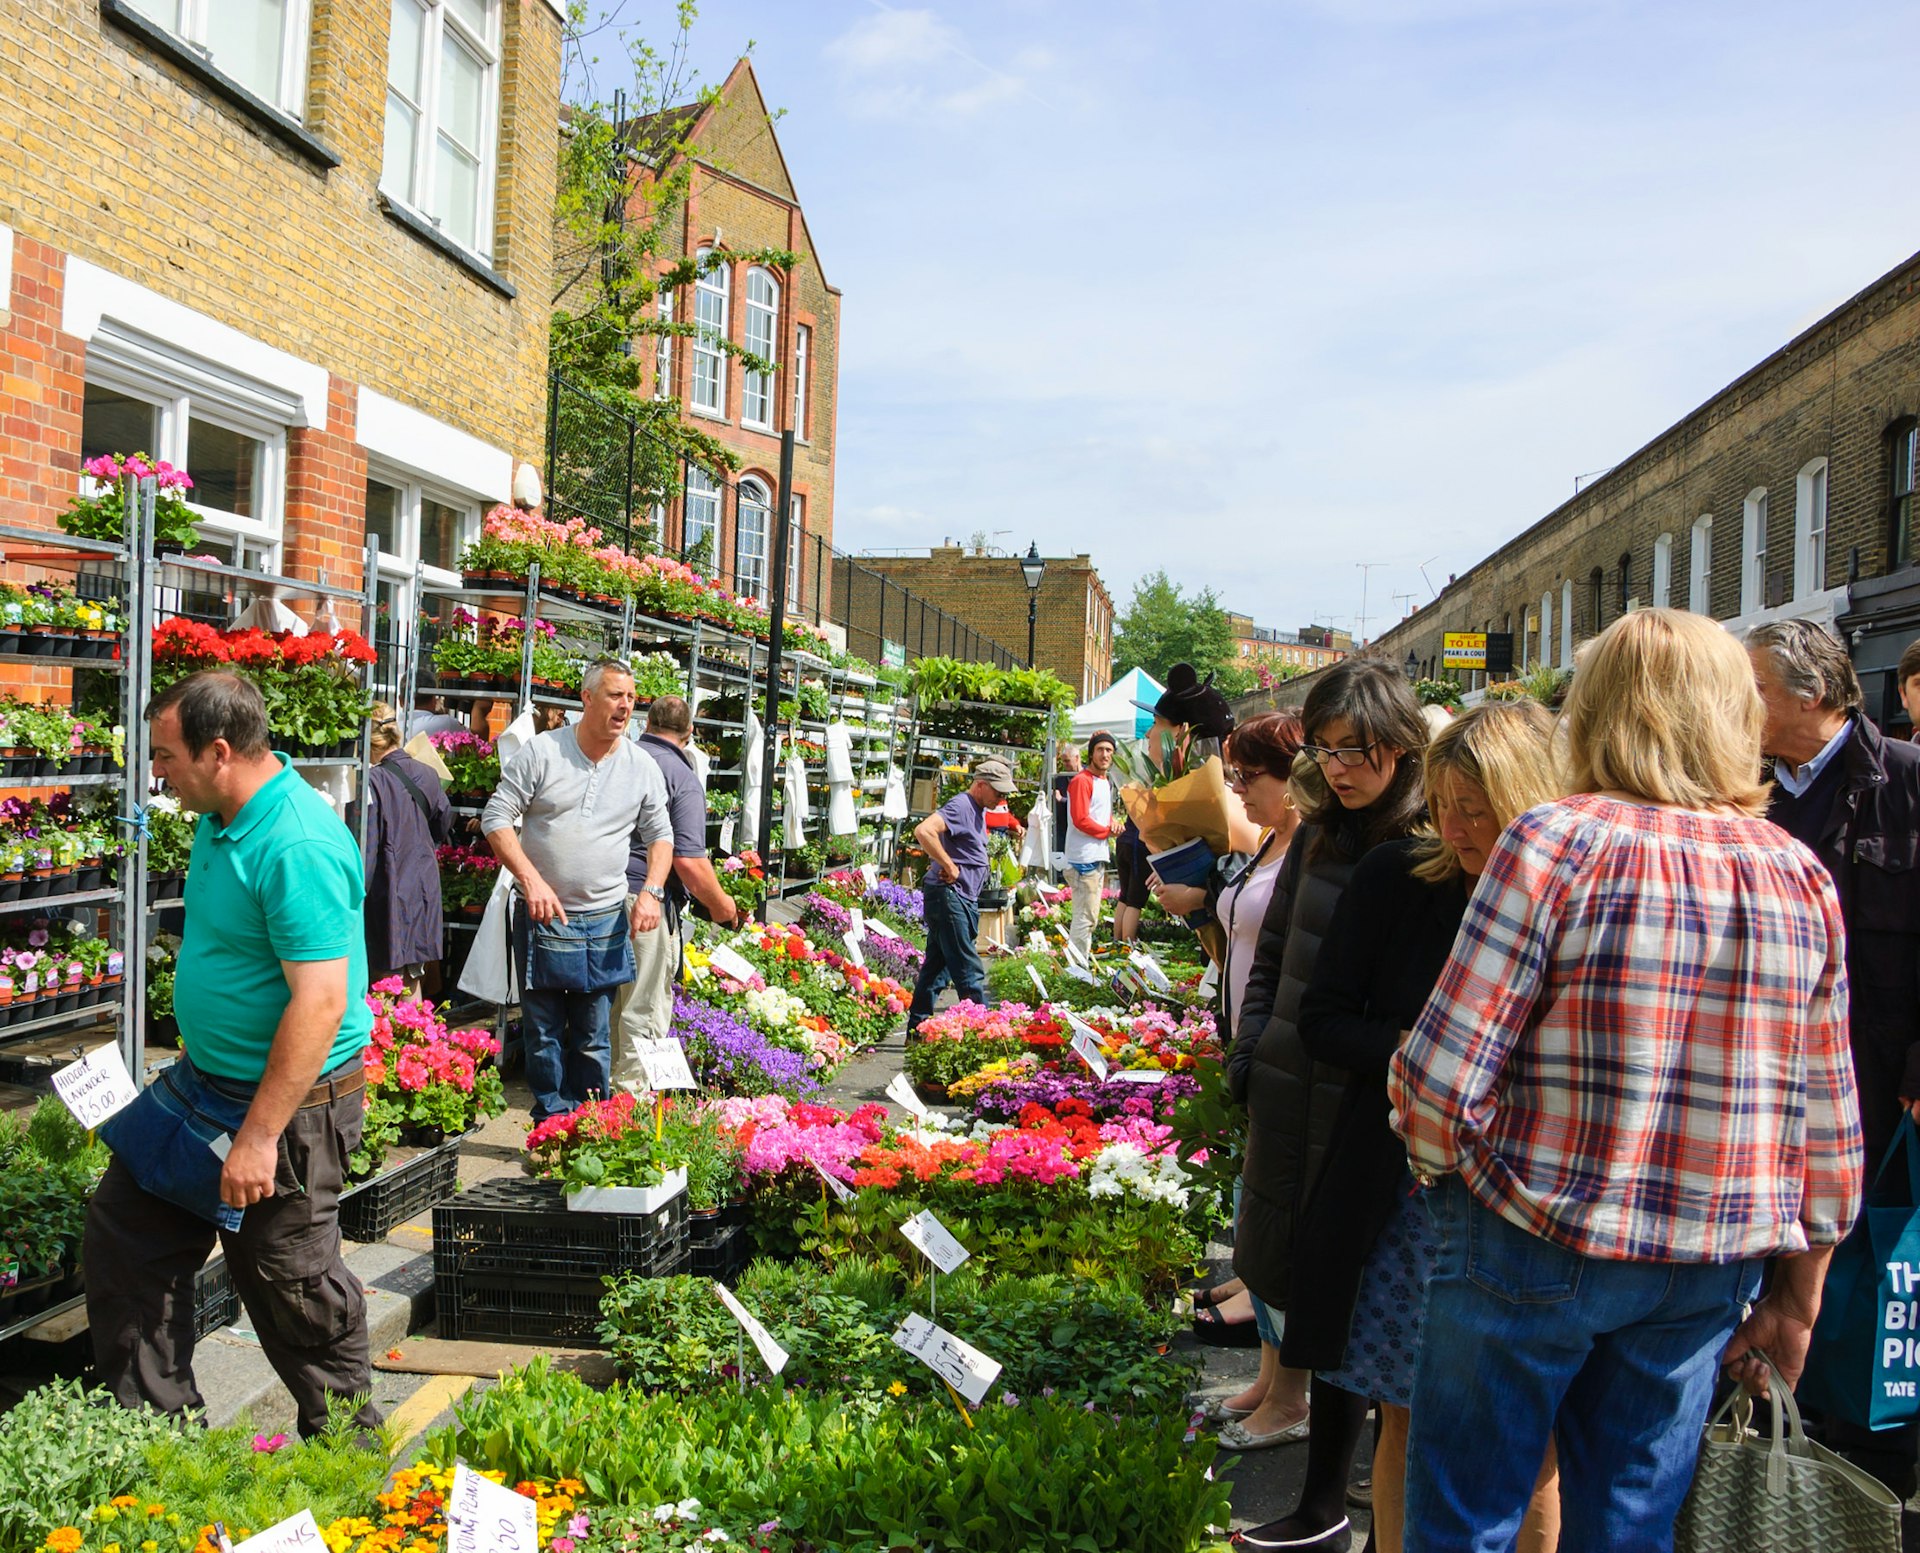 People buying flowers at Columbia Road Flower Market. This London's principal flower market is opened every Sunday.